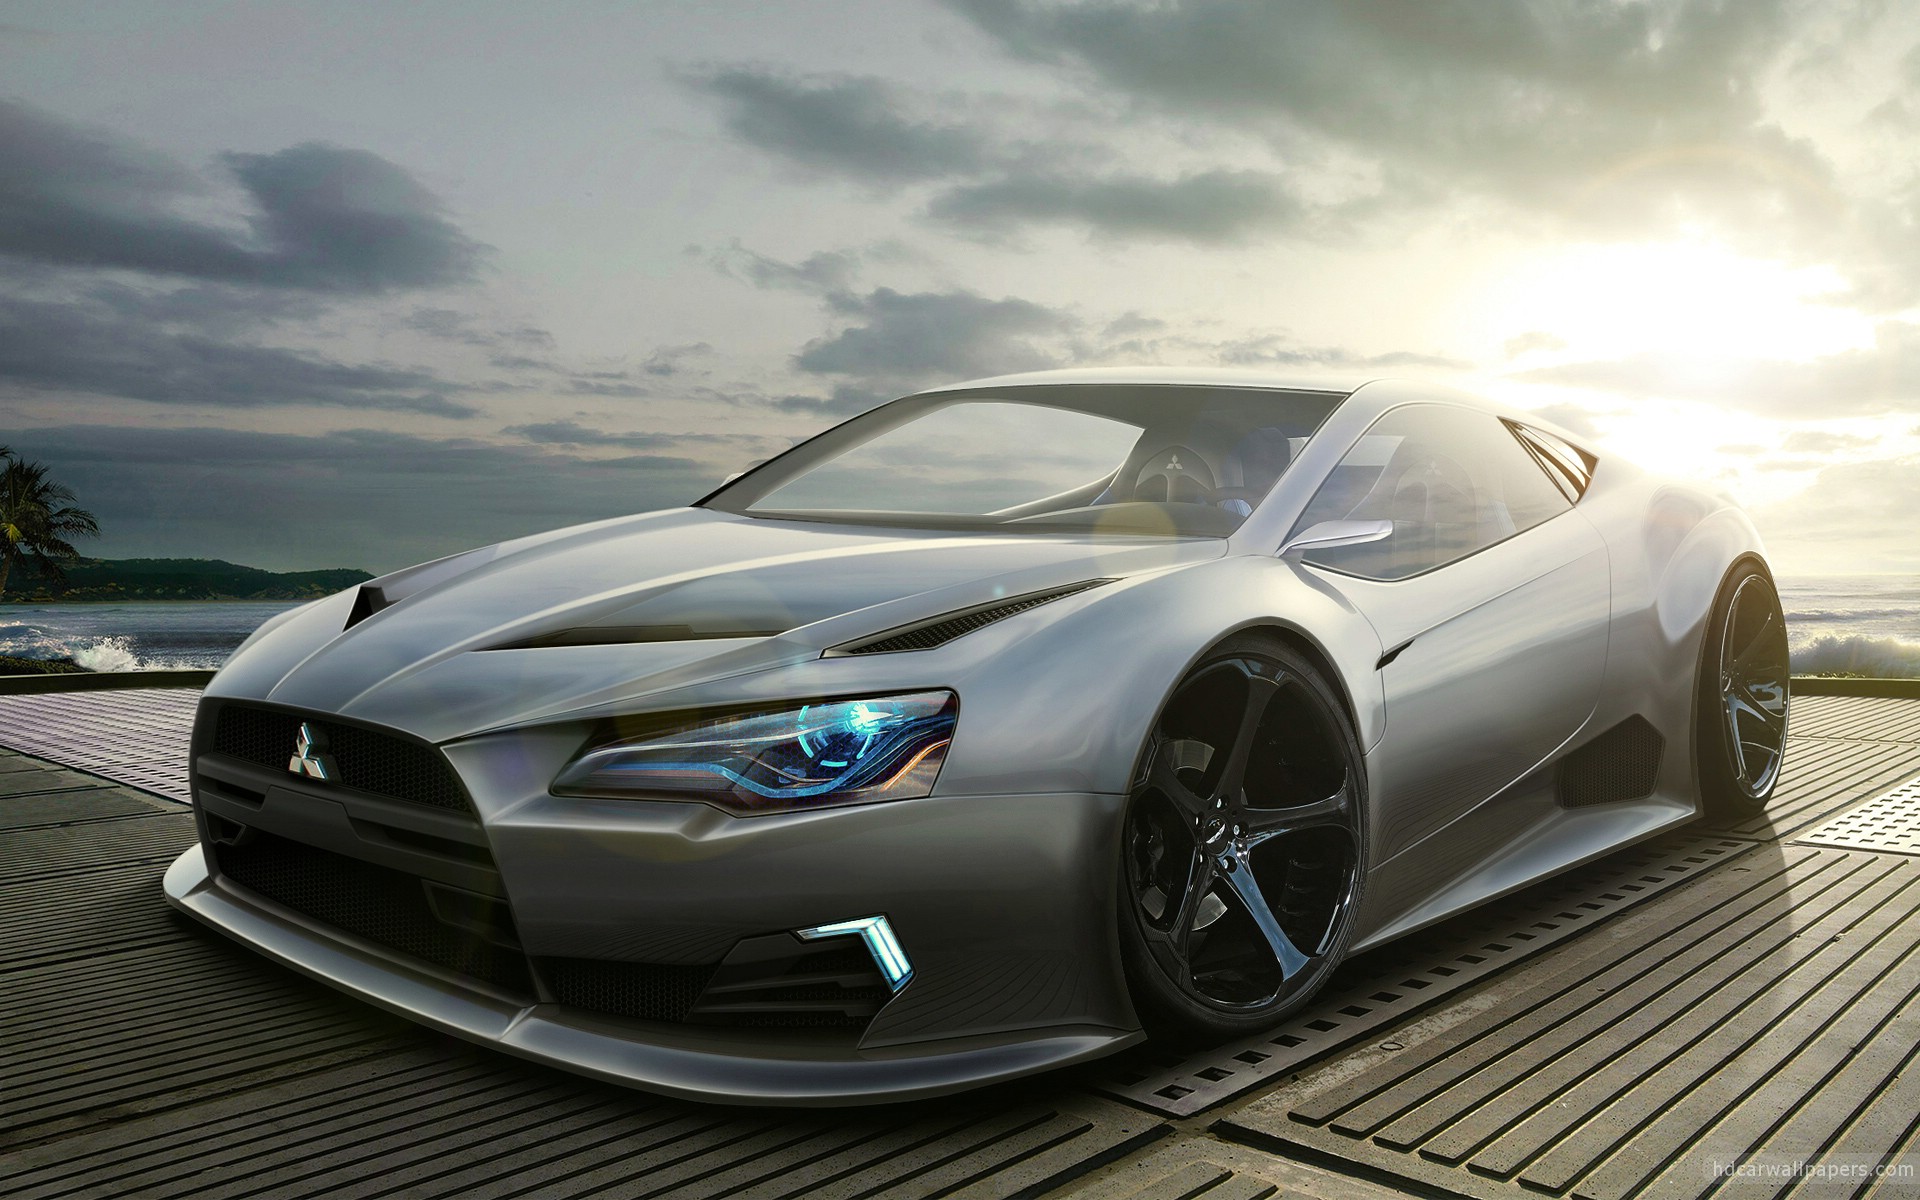 Concept cars 1080P, 2K, 4K, 5K HD wallpapers free download